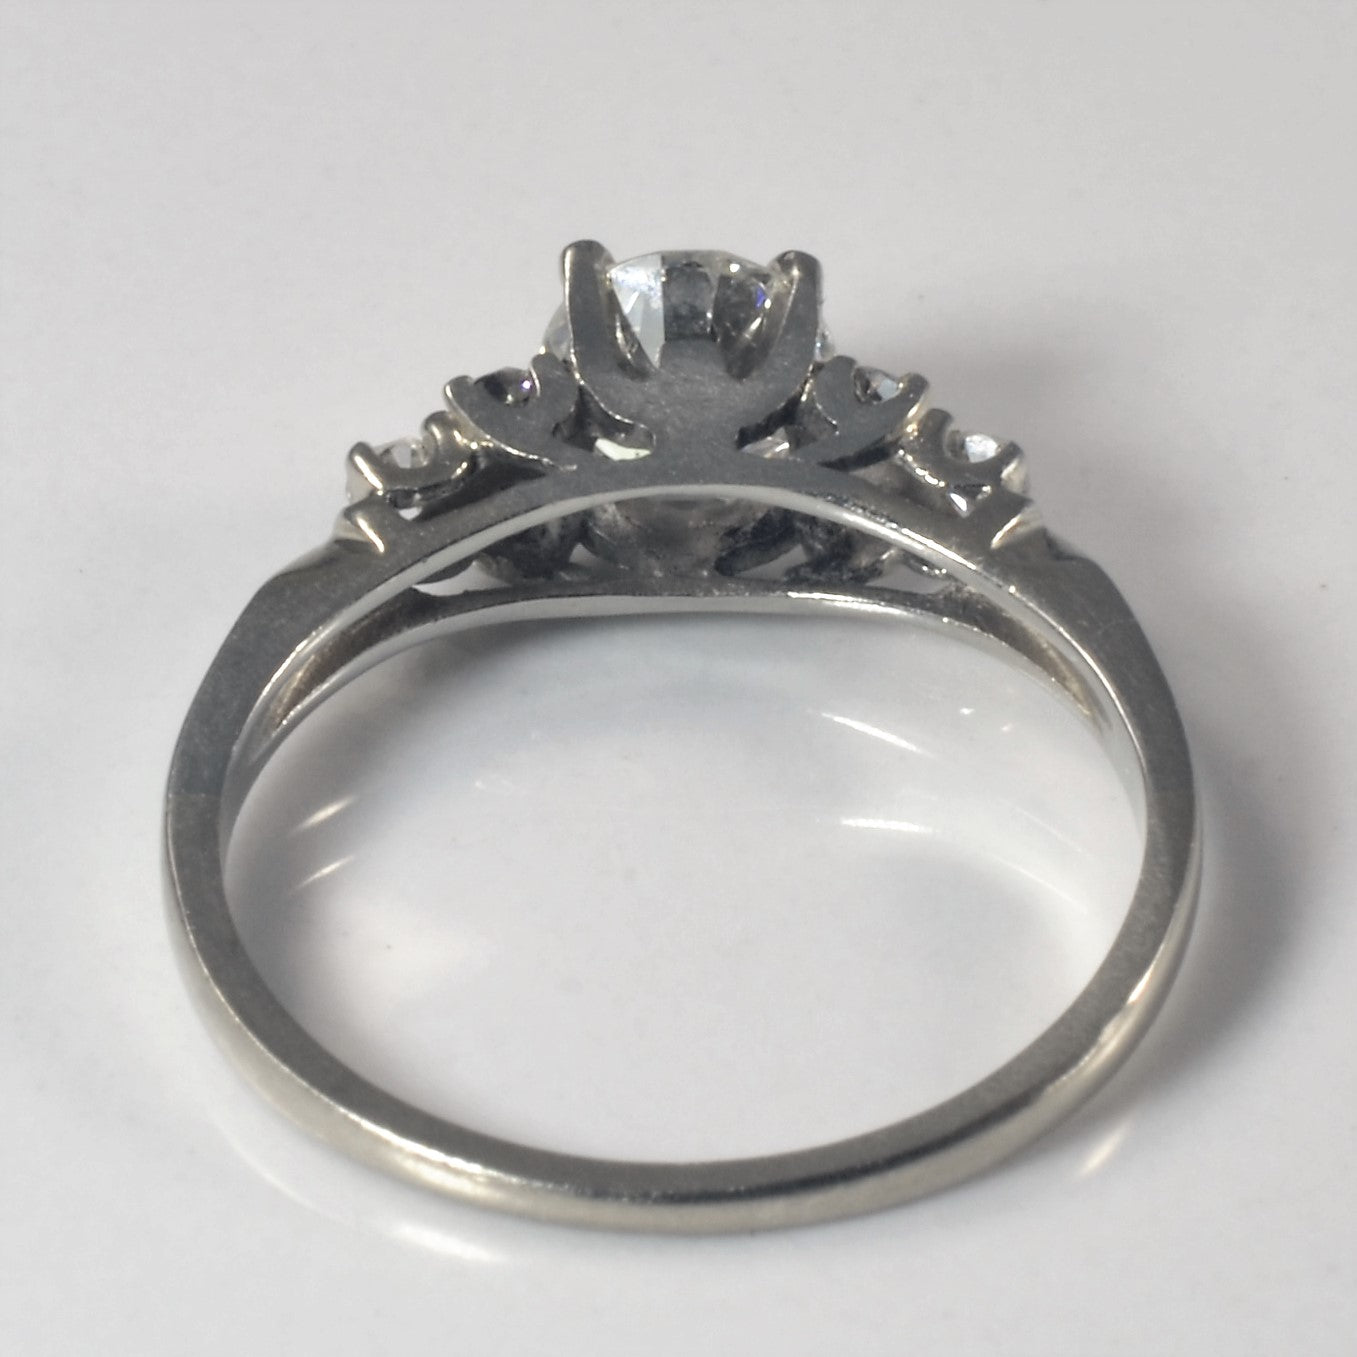 1940s Side Stone Detailed Engagement Ring | 0.93ctw | SZ 6.75 |